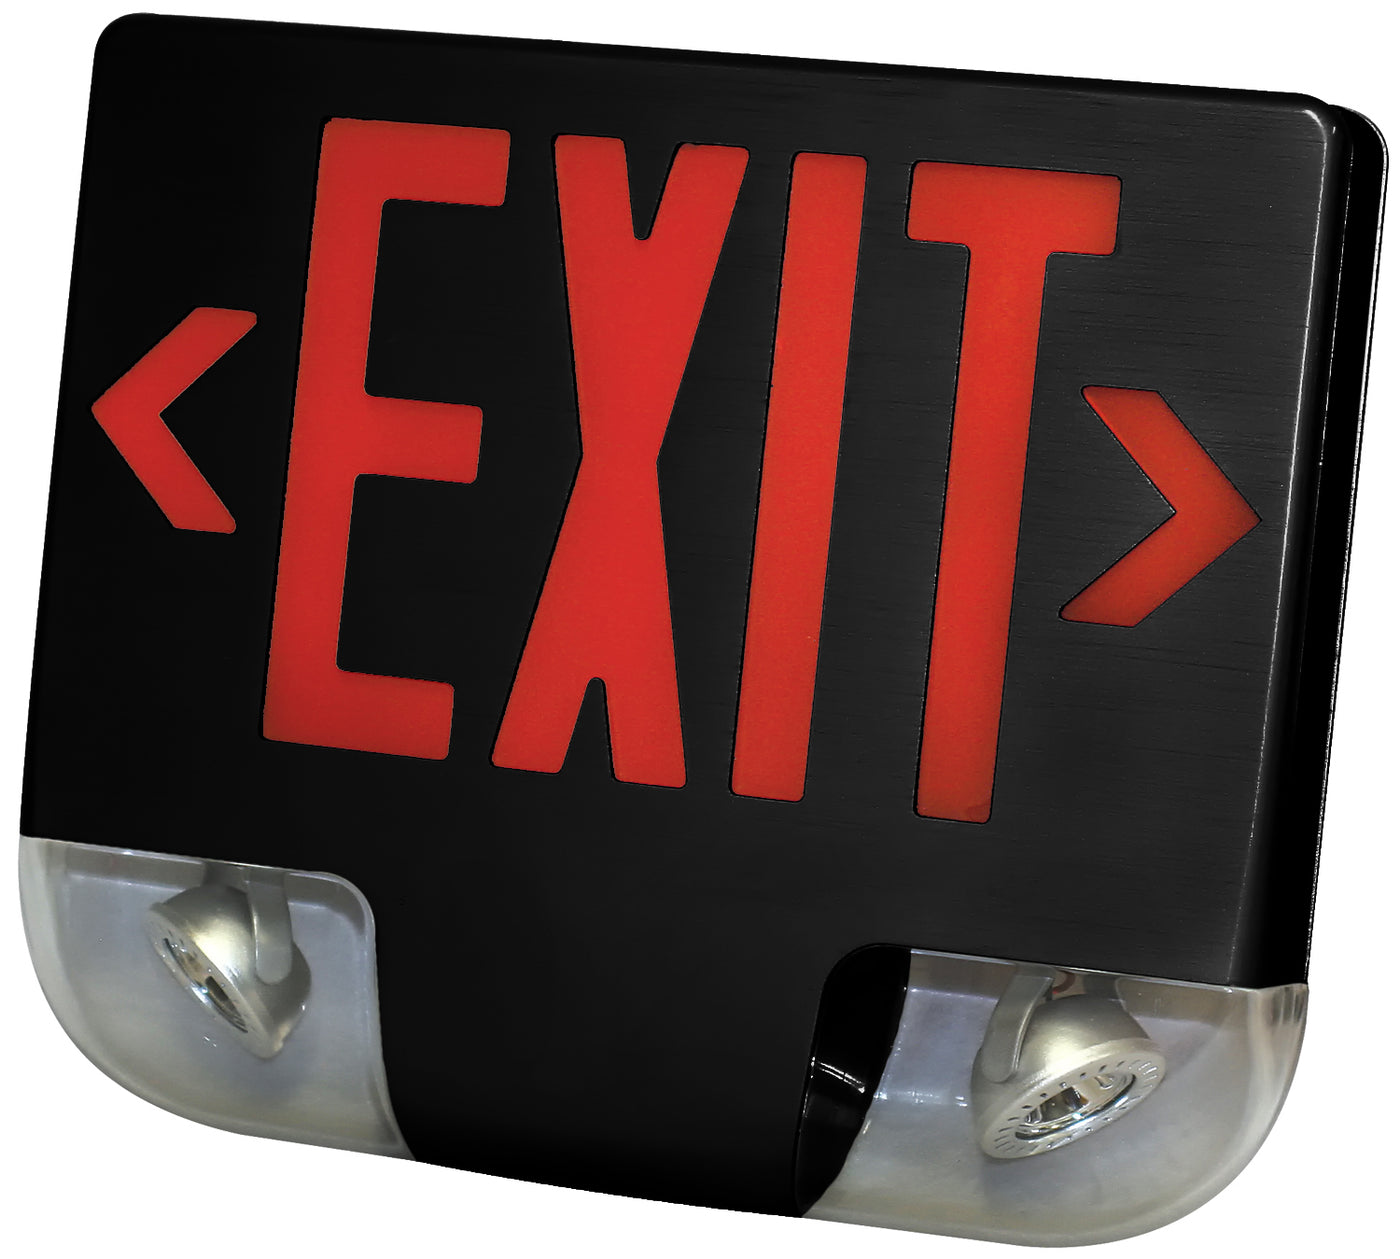 LED Die-Cast White Exit/Emergency Combo, Red or Green